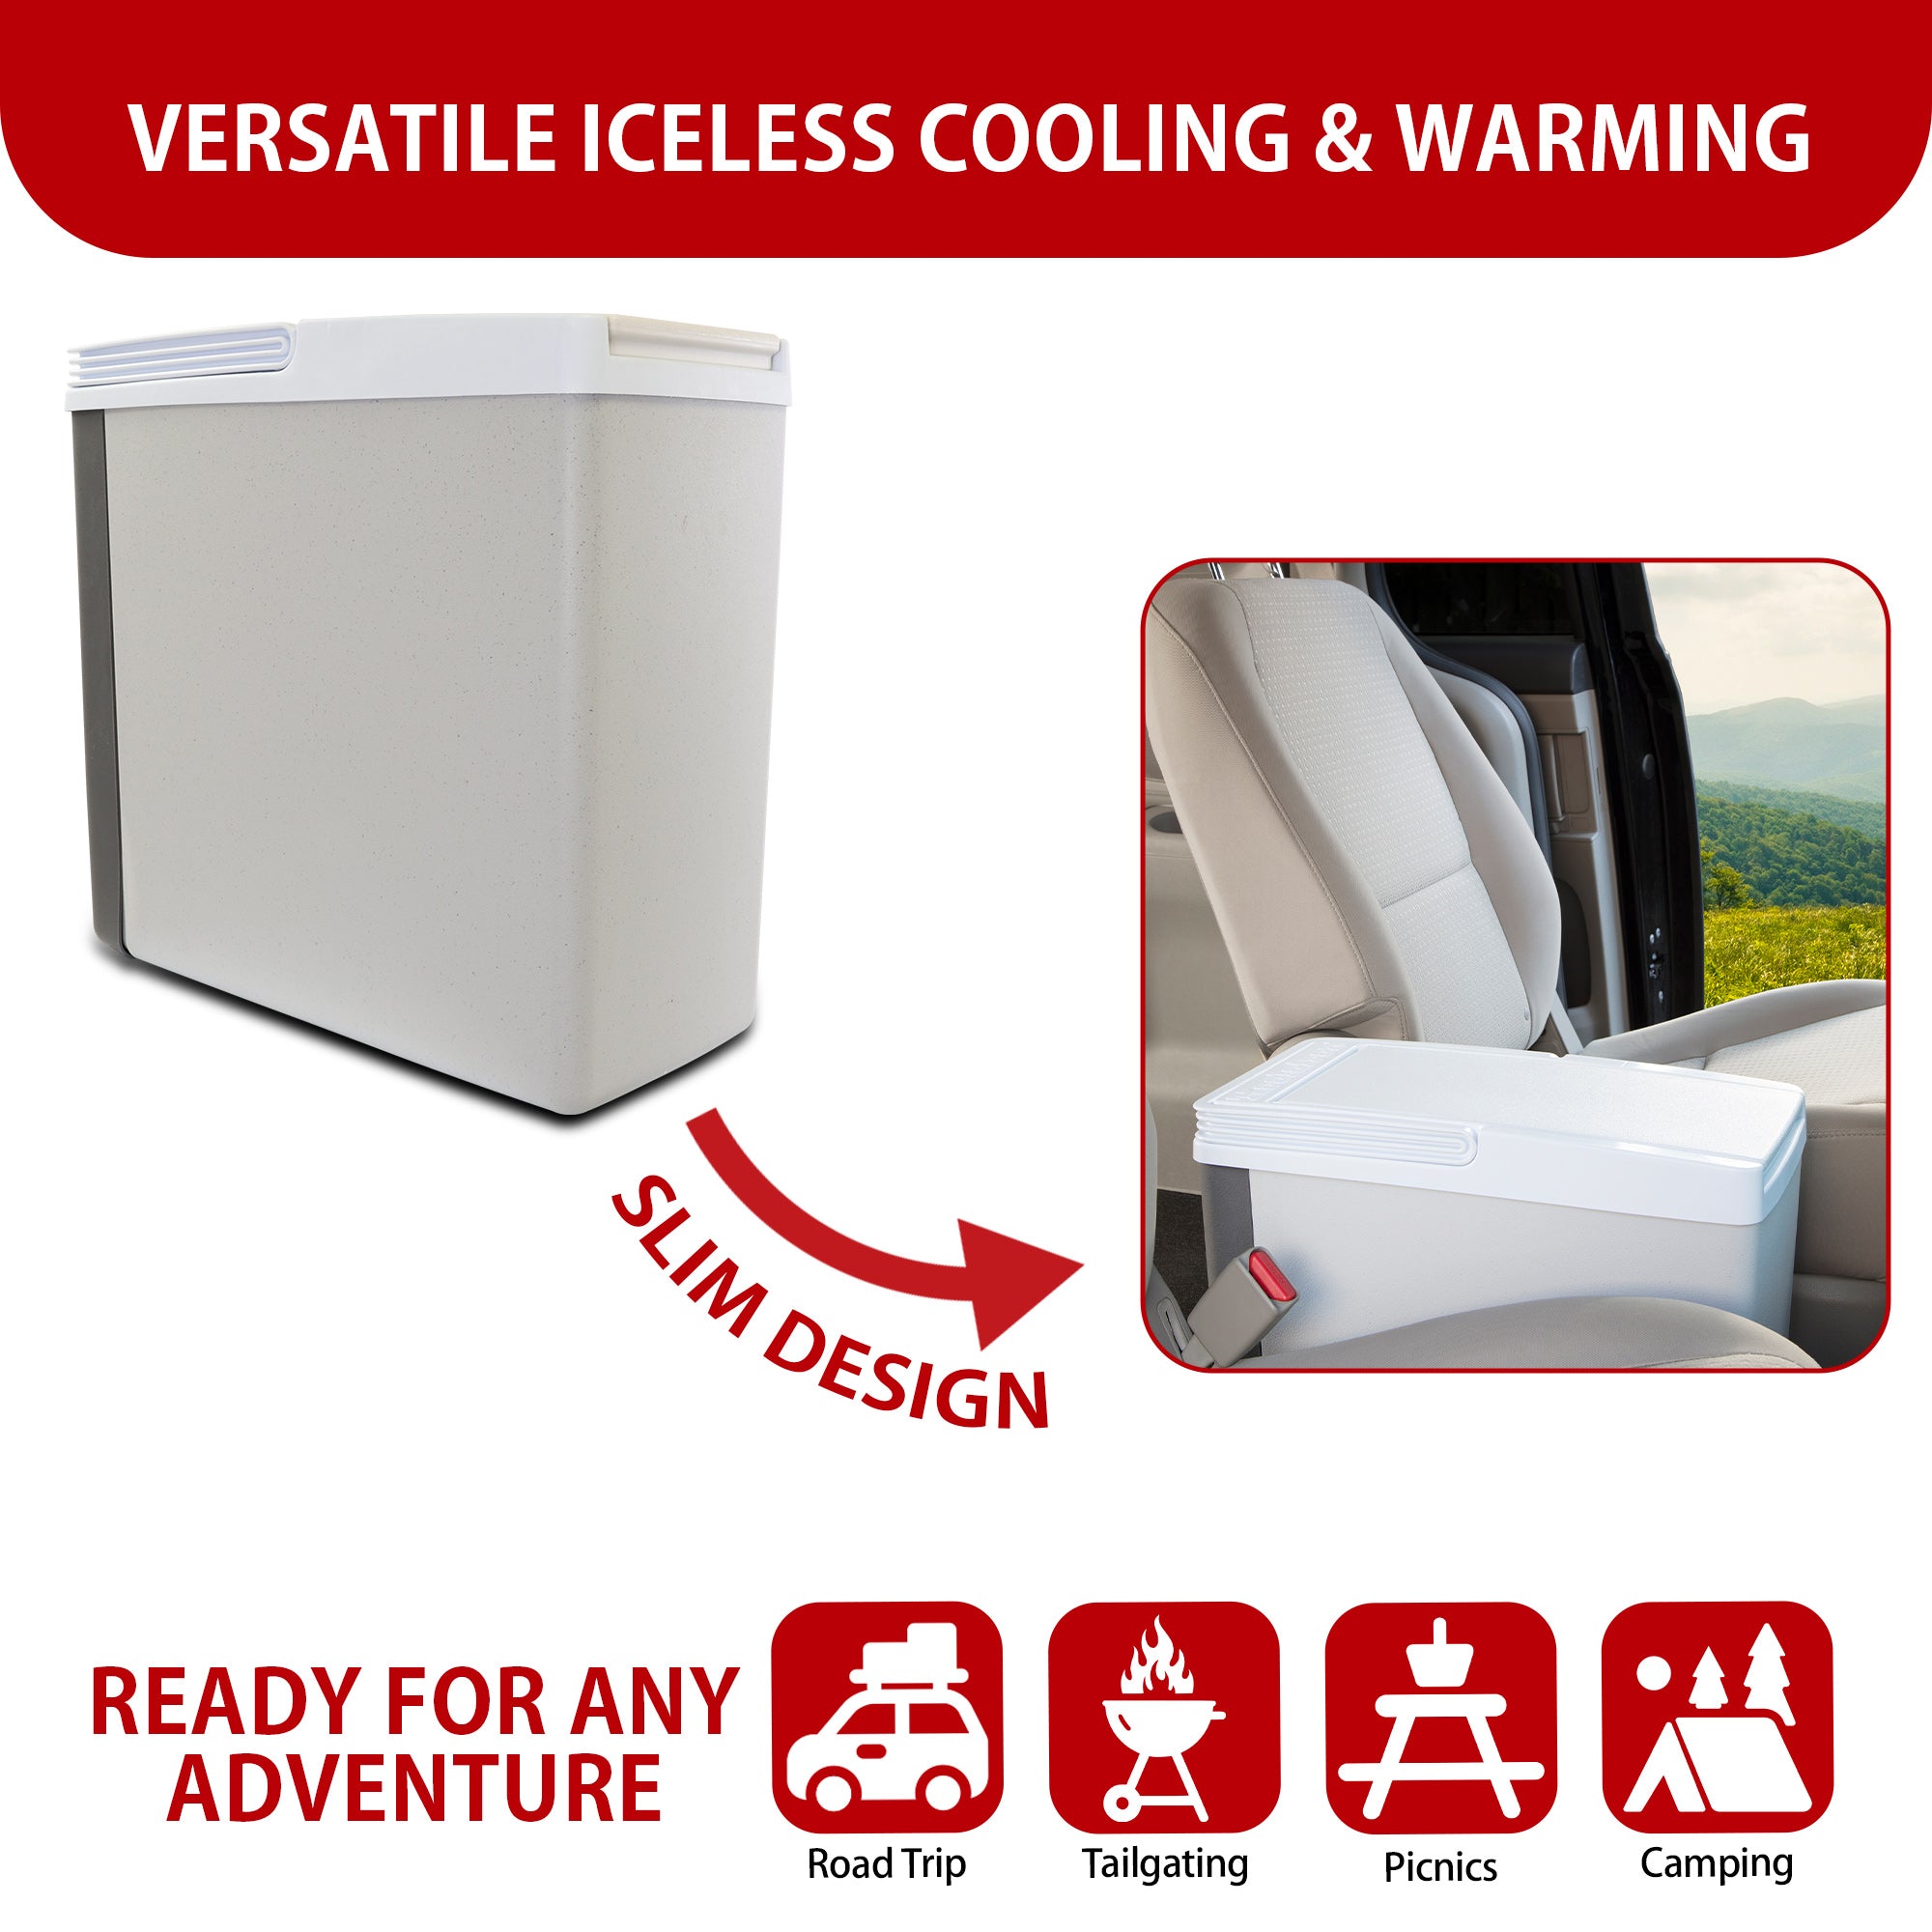 Two images show the Koolatron 12V cooler/warmer on a white background and between the seats of a minivan with an arrow labeled "slim design" pointing from the first image to the second. Text above reads, "VERSATILE ICELESS COOLING & WARMING." Text below reads, "READY FOR ANY ADVENTURE" followed by icons labeled: Road trip, tailgating, picnics, and camping.